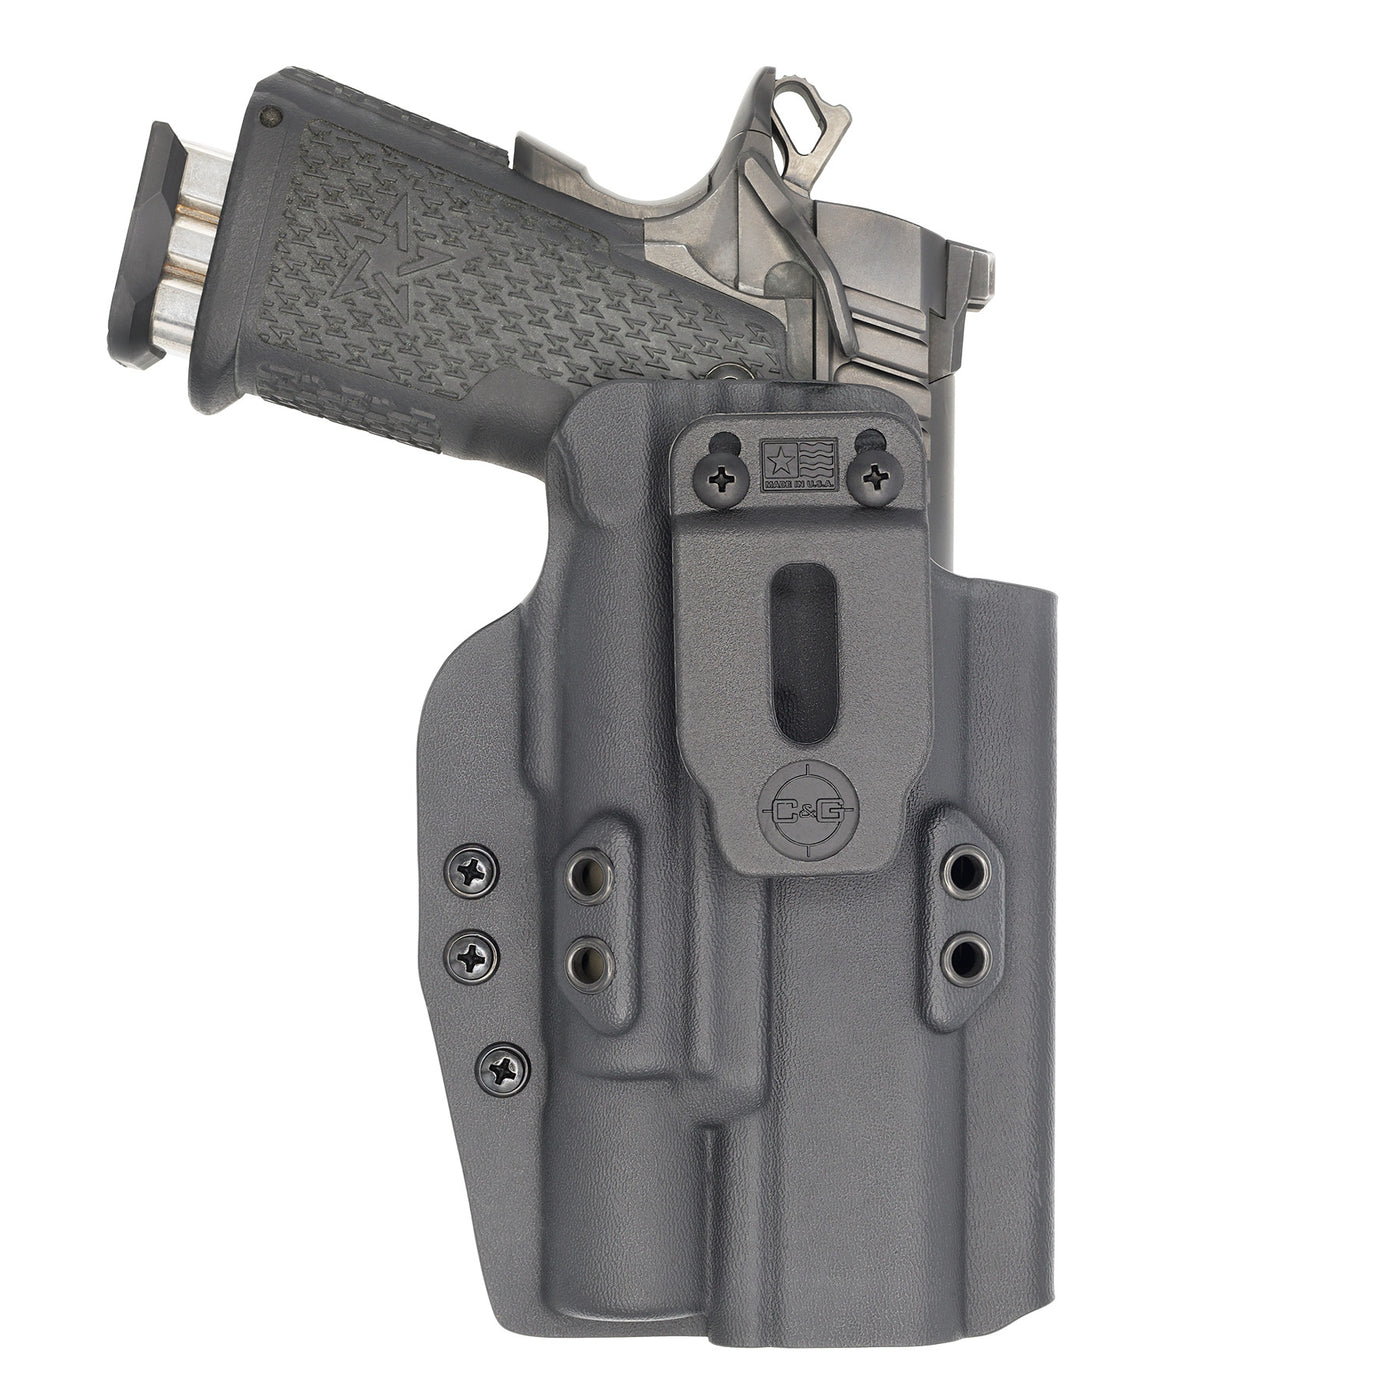 C&G Holsters Quickship IWB Tactical 1911/2011 Surefire X300 in holstered position